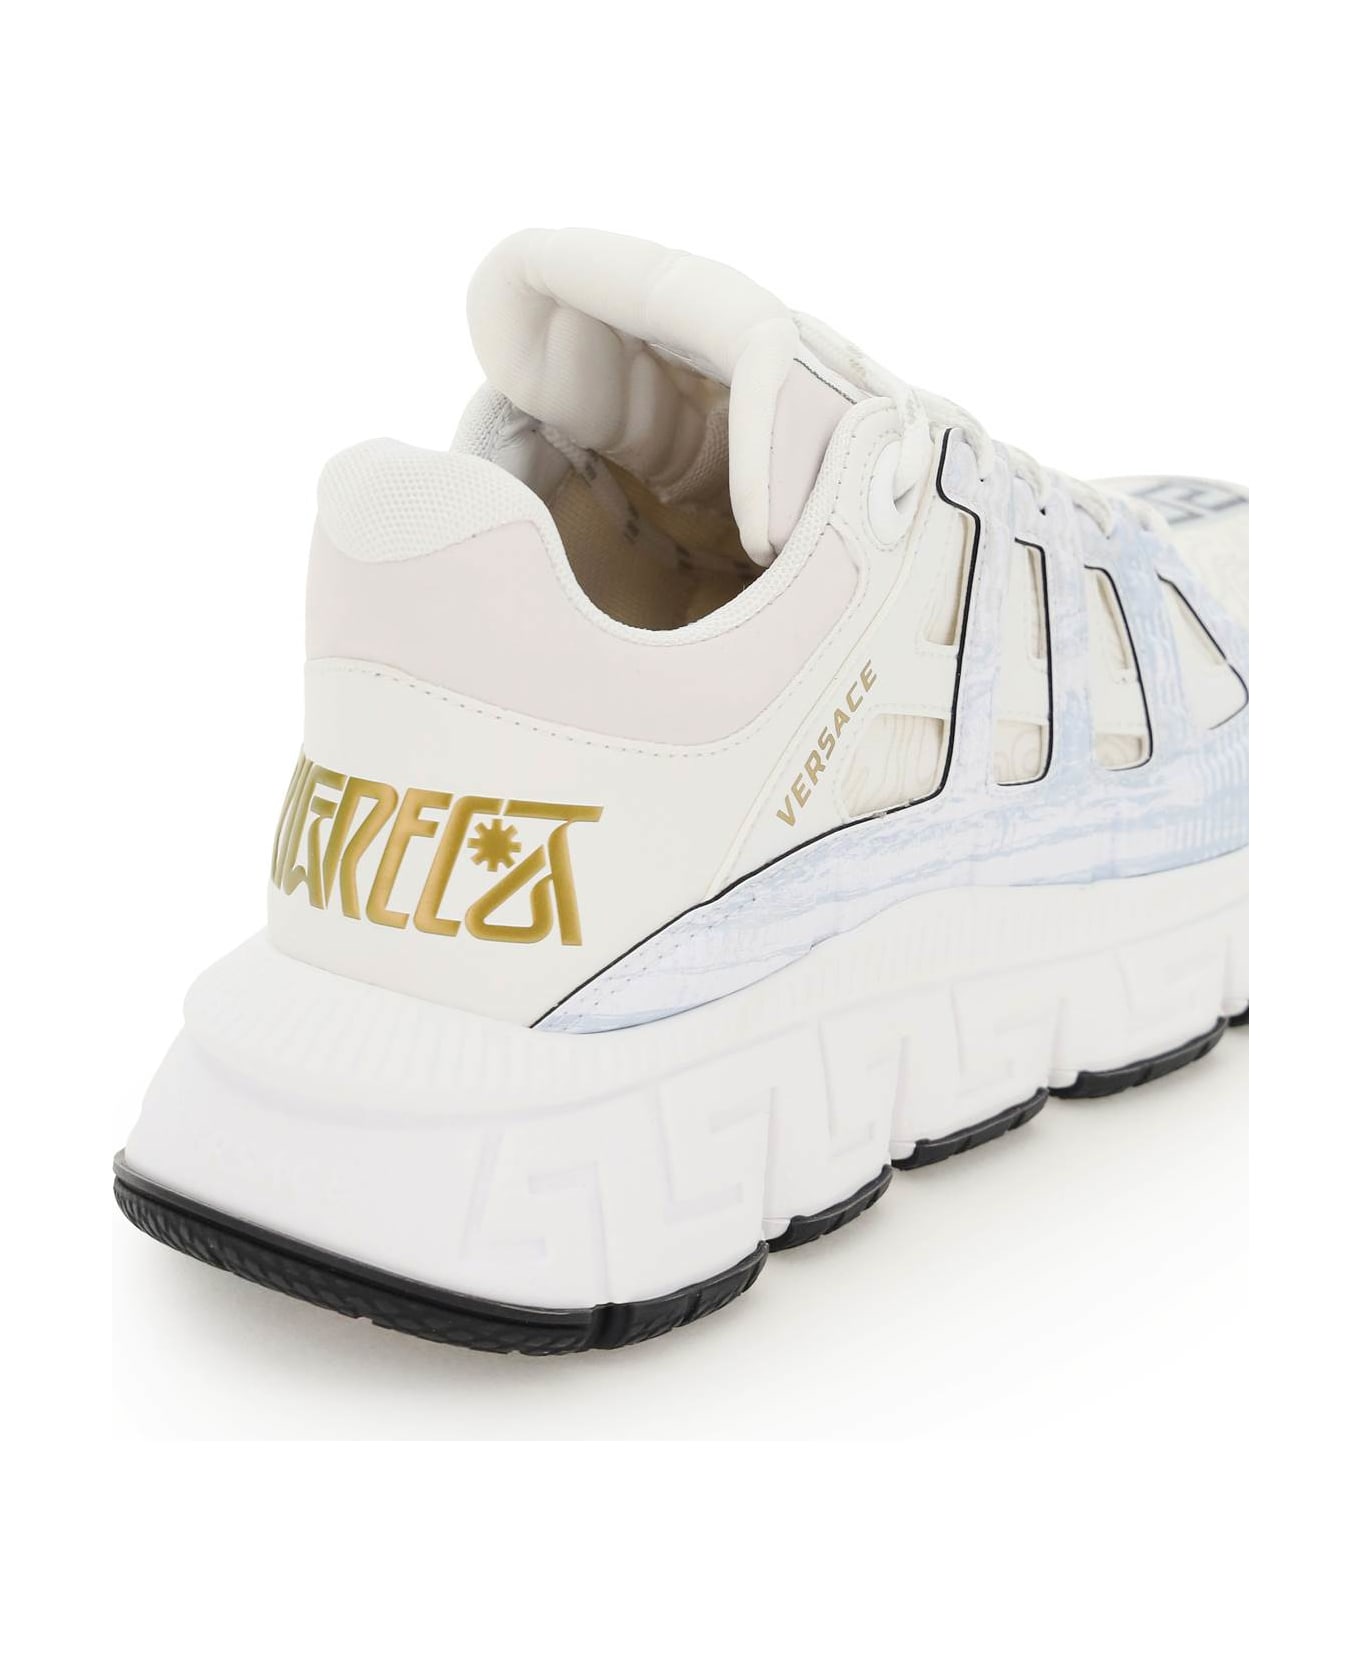 Versace White Leather Blend Trigreakers - White